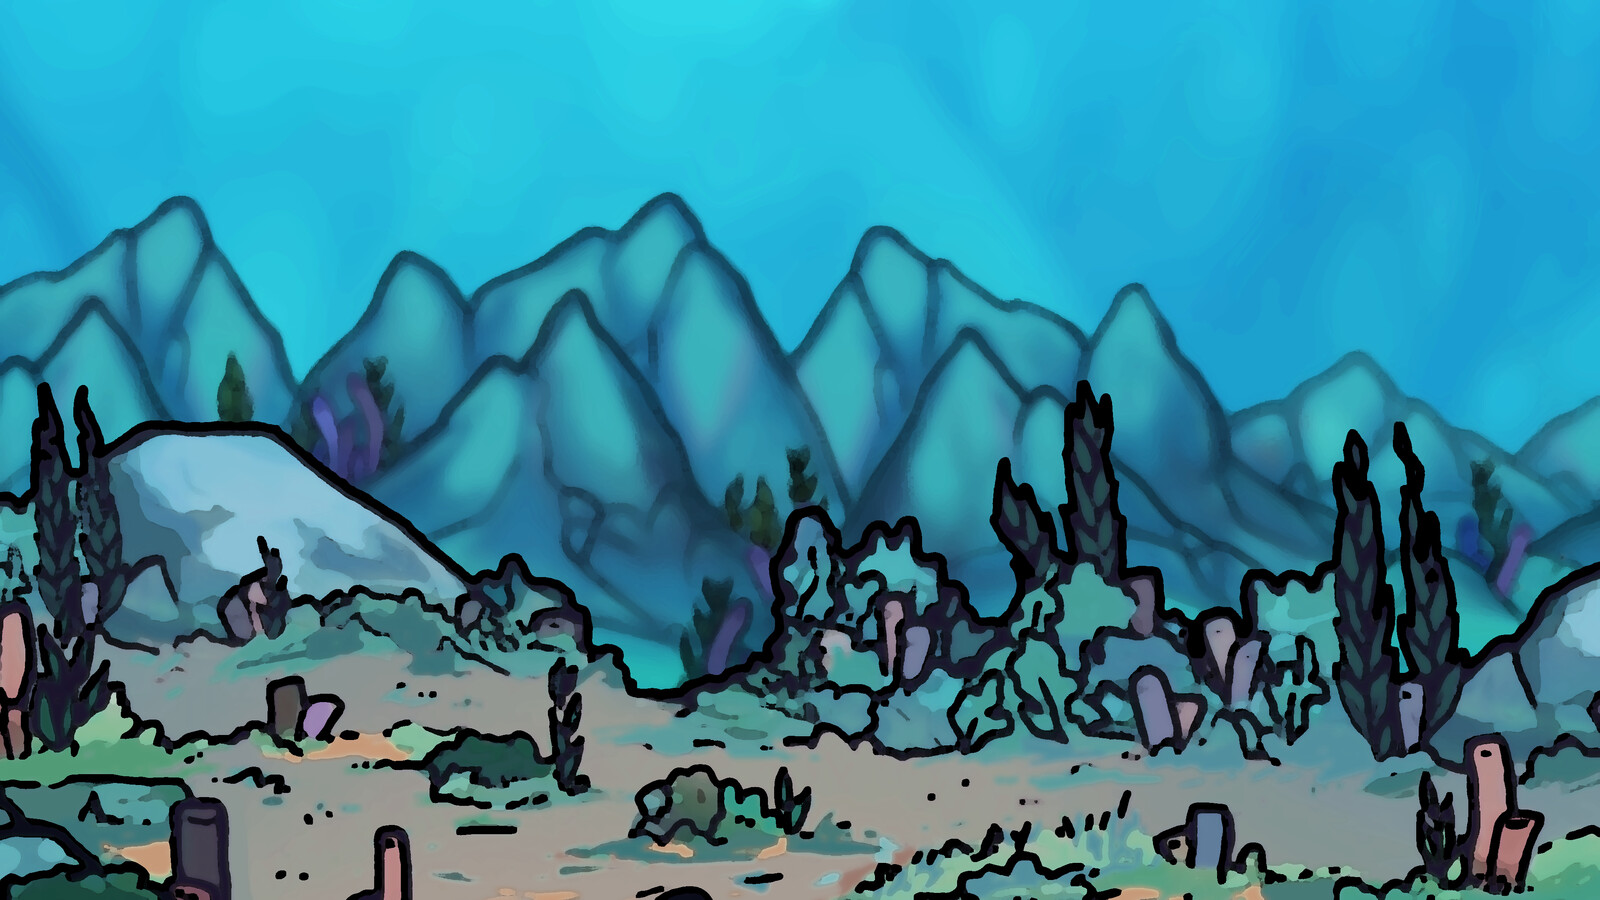 Urchins and Ink Background Concept Art